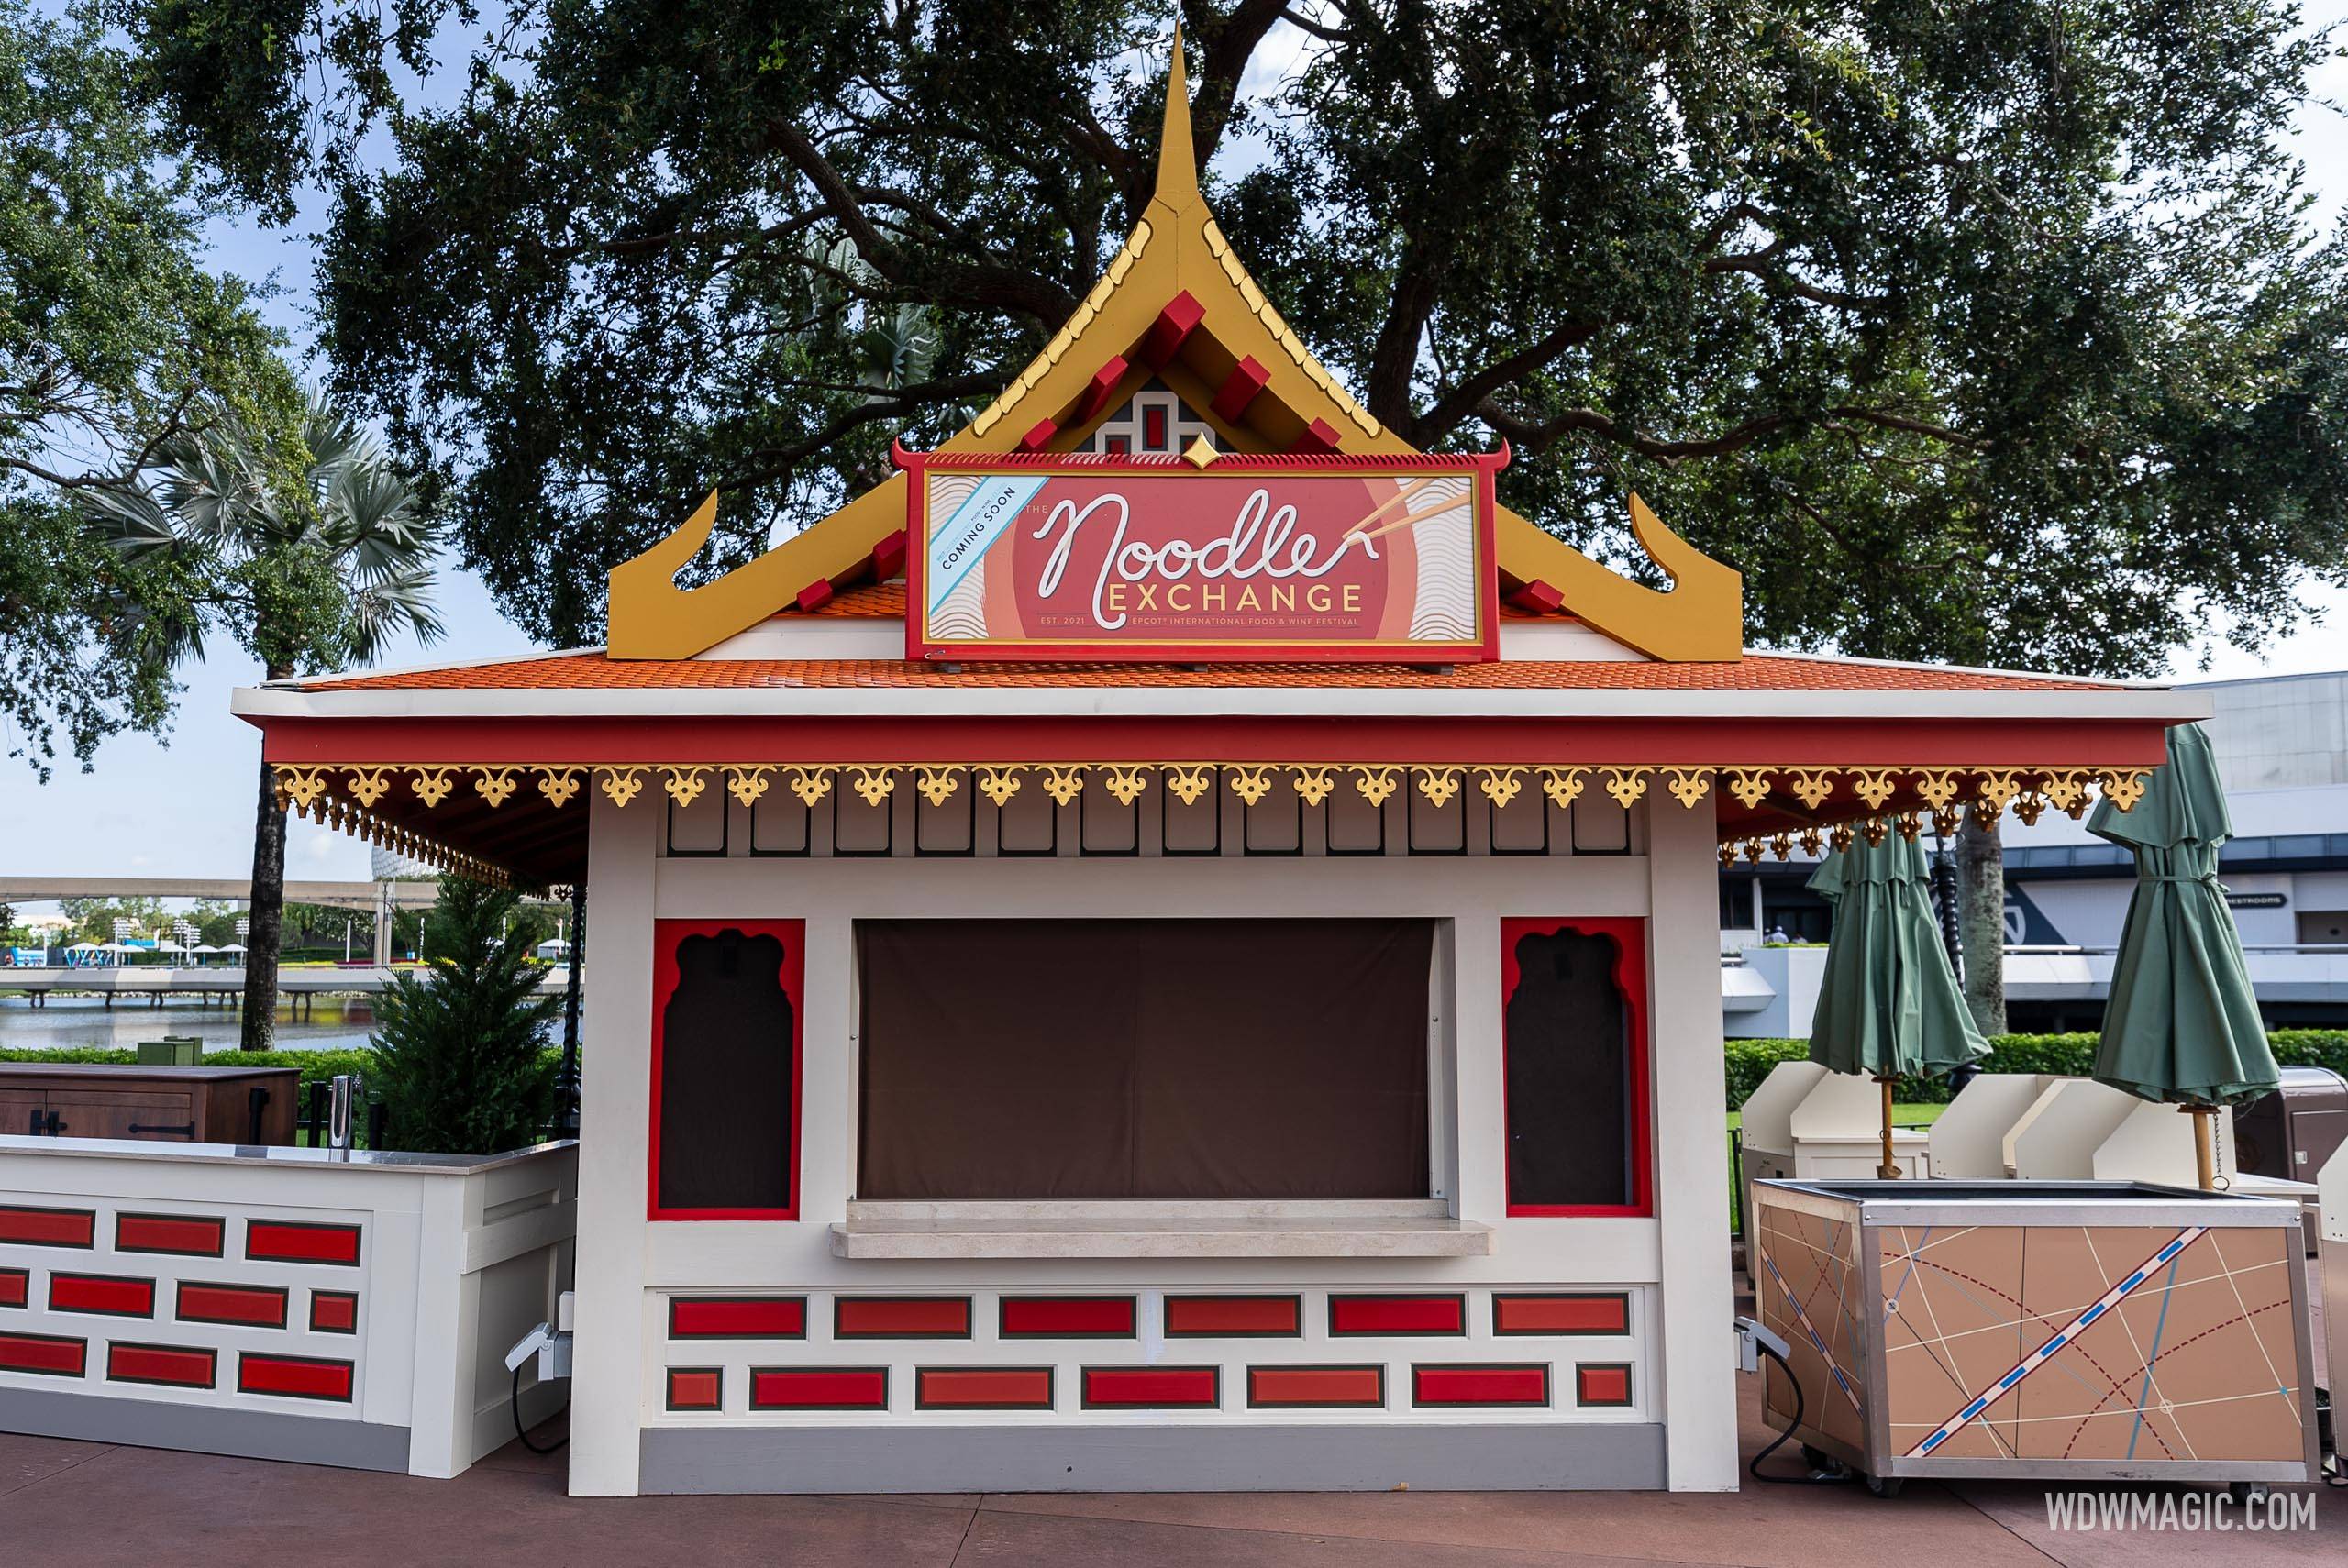 Kiosks readied for the EPCOT International Food and Wine Festival starting next week at Walt Disney World